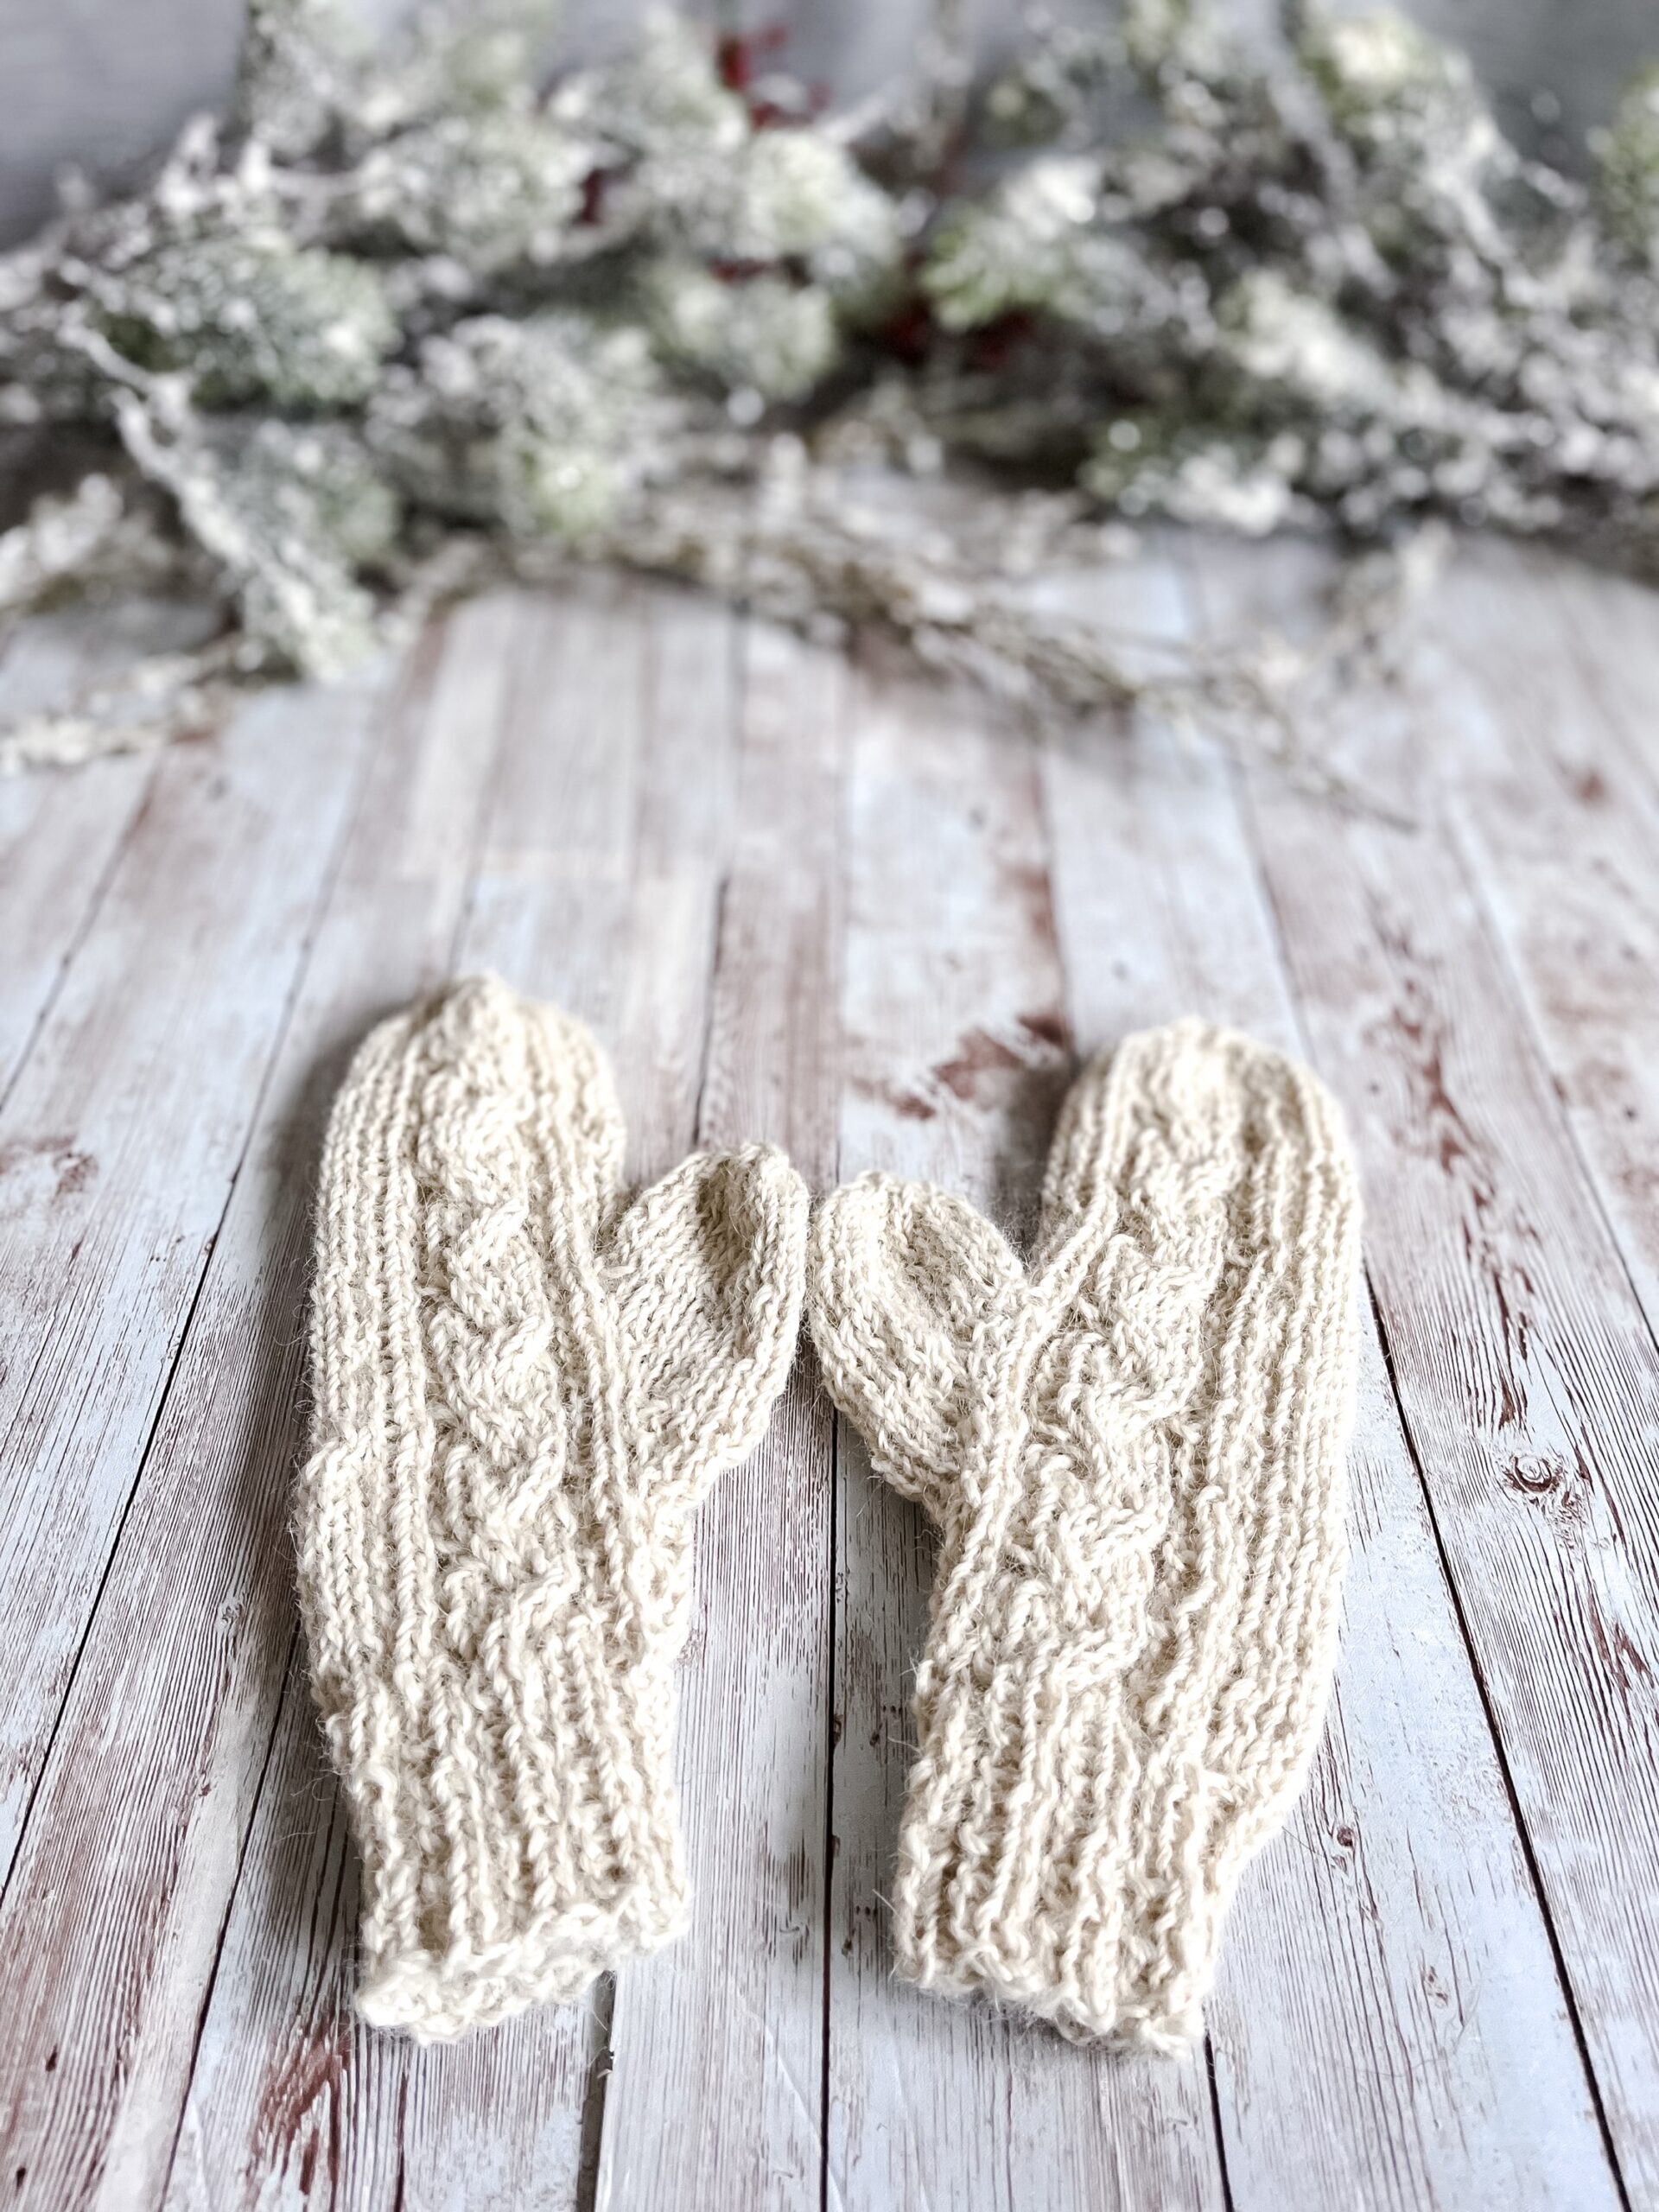 A pair of natural white alpaca mittens rests on a wood plank background. In the background of the photo is snow covered pine branches